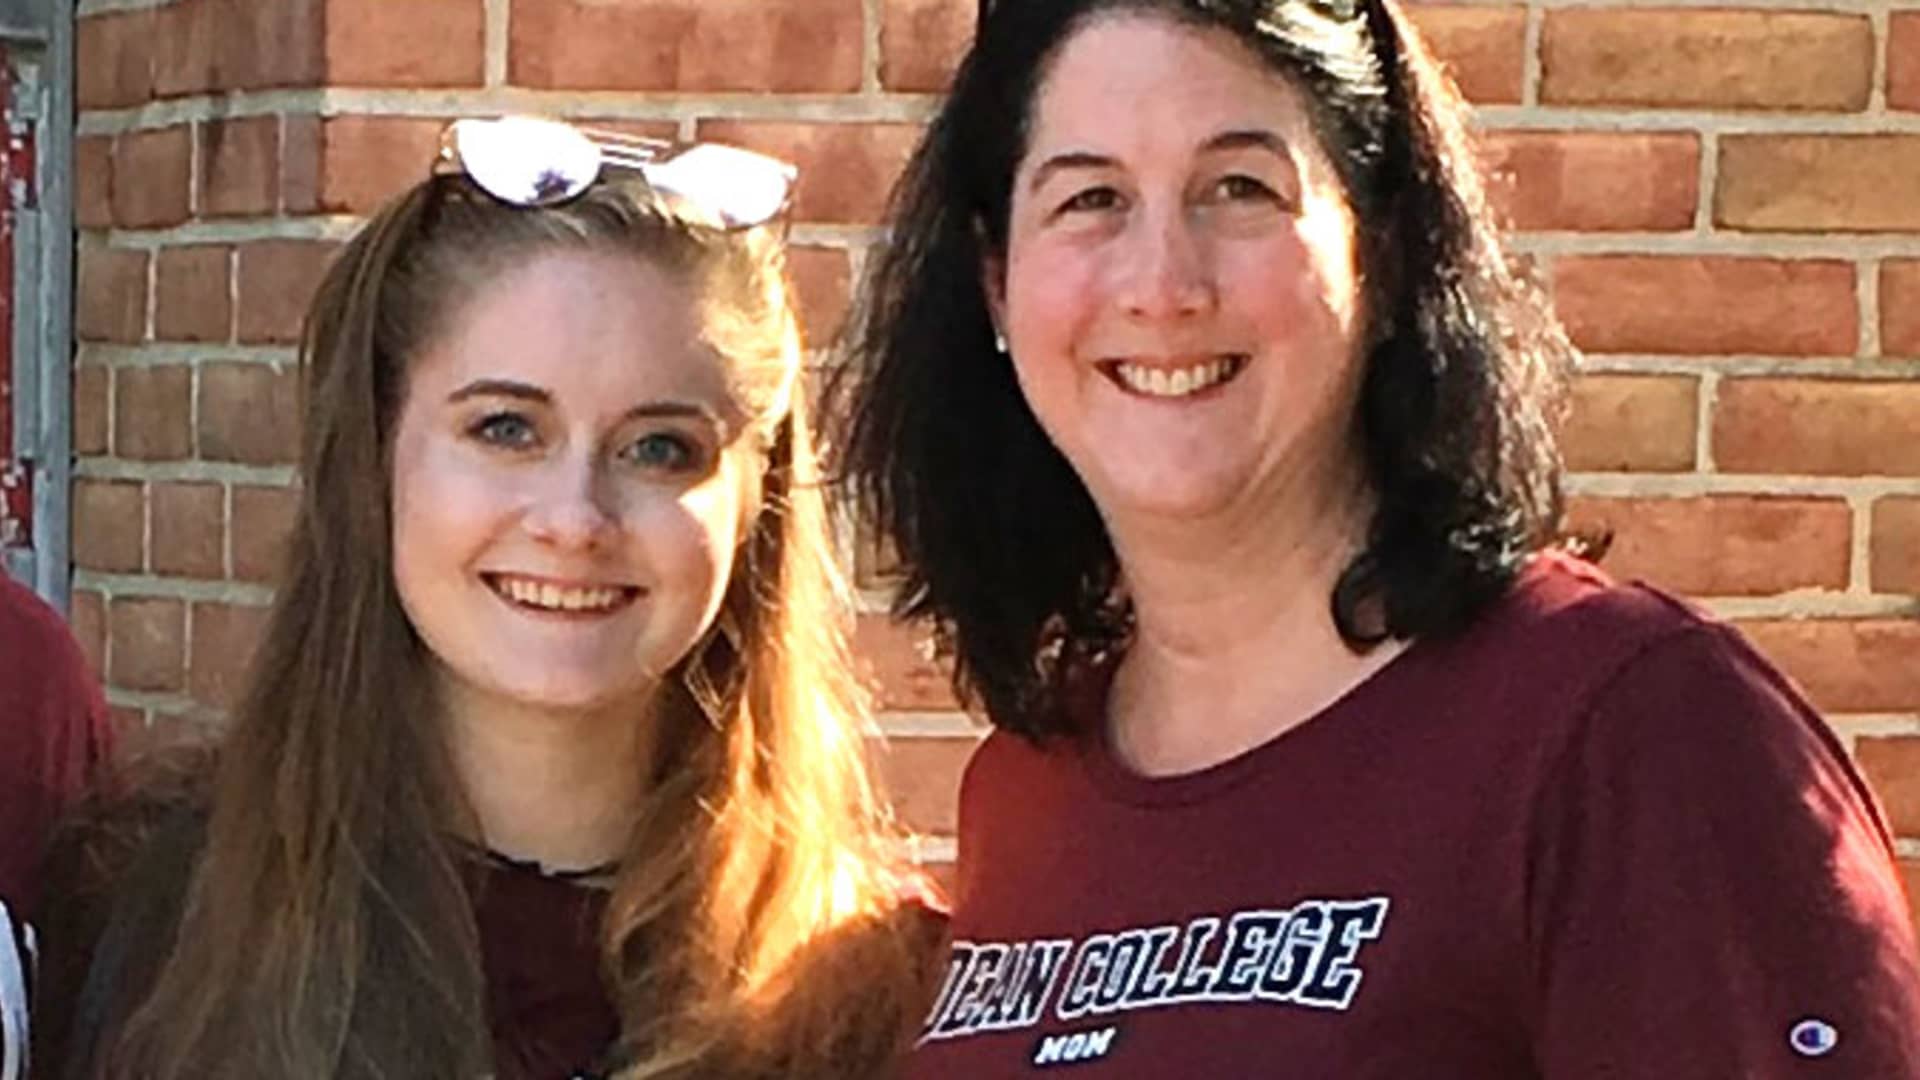 Laura Hoder with her daughter at Dean College.